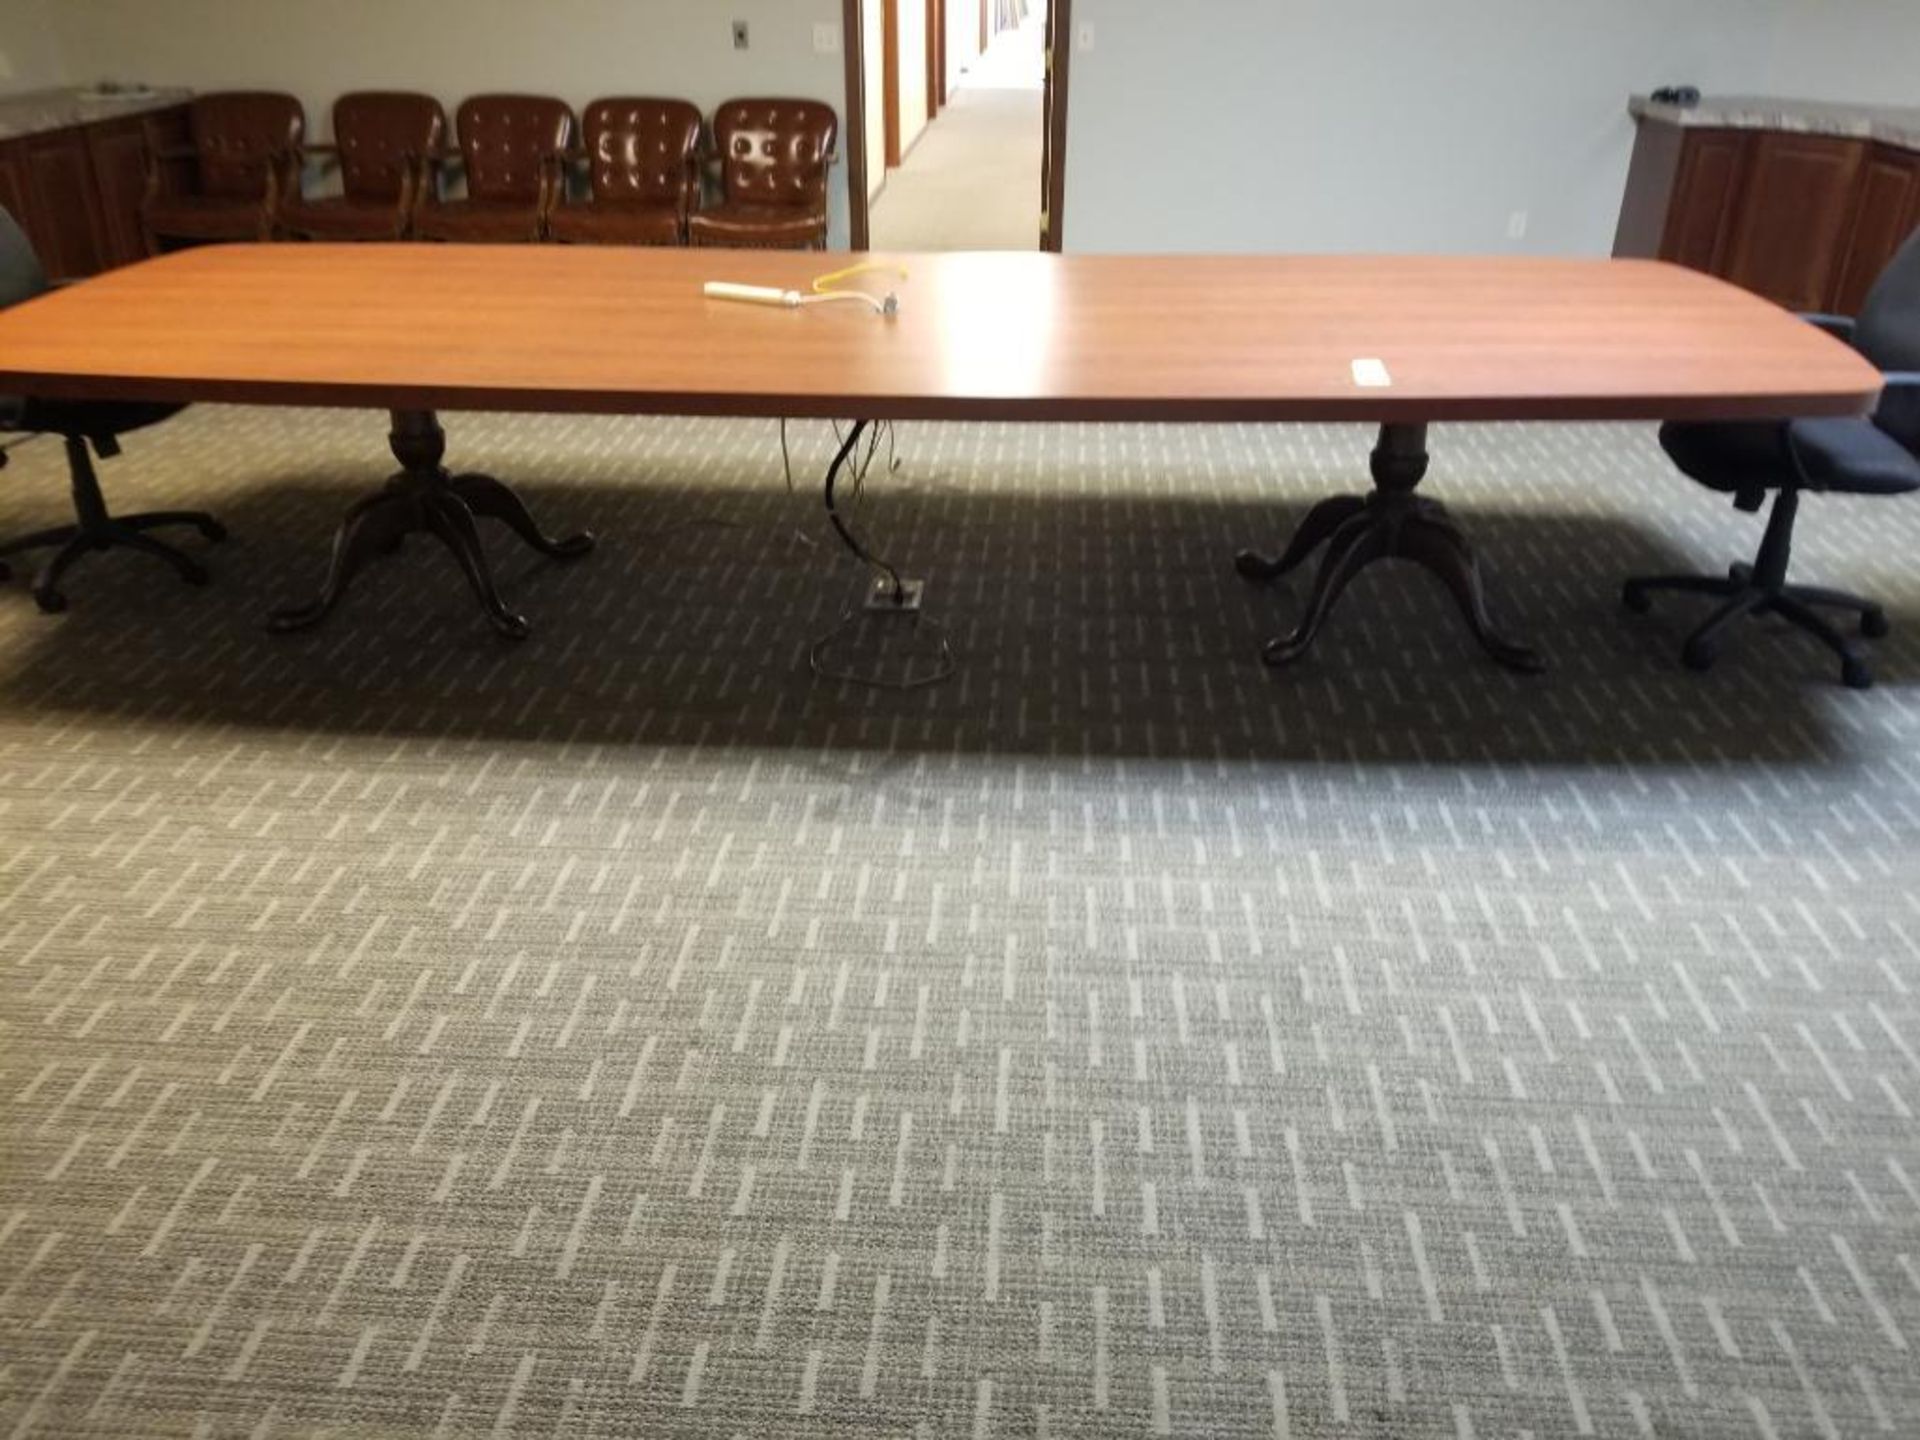 Office conference table 167x59x31 inches LxWxH. W/ two chairs.